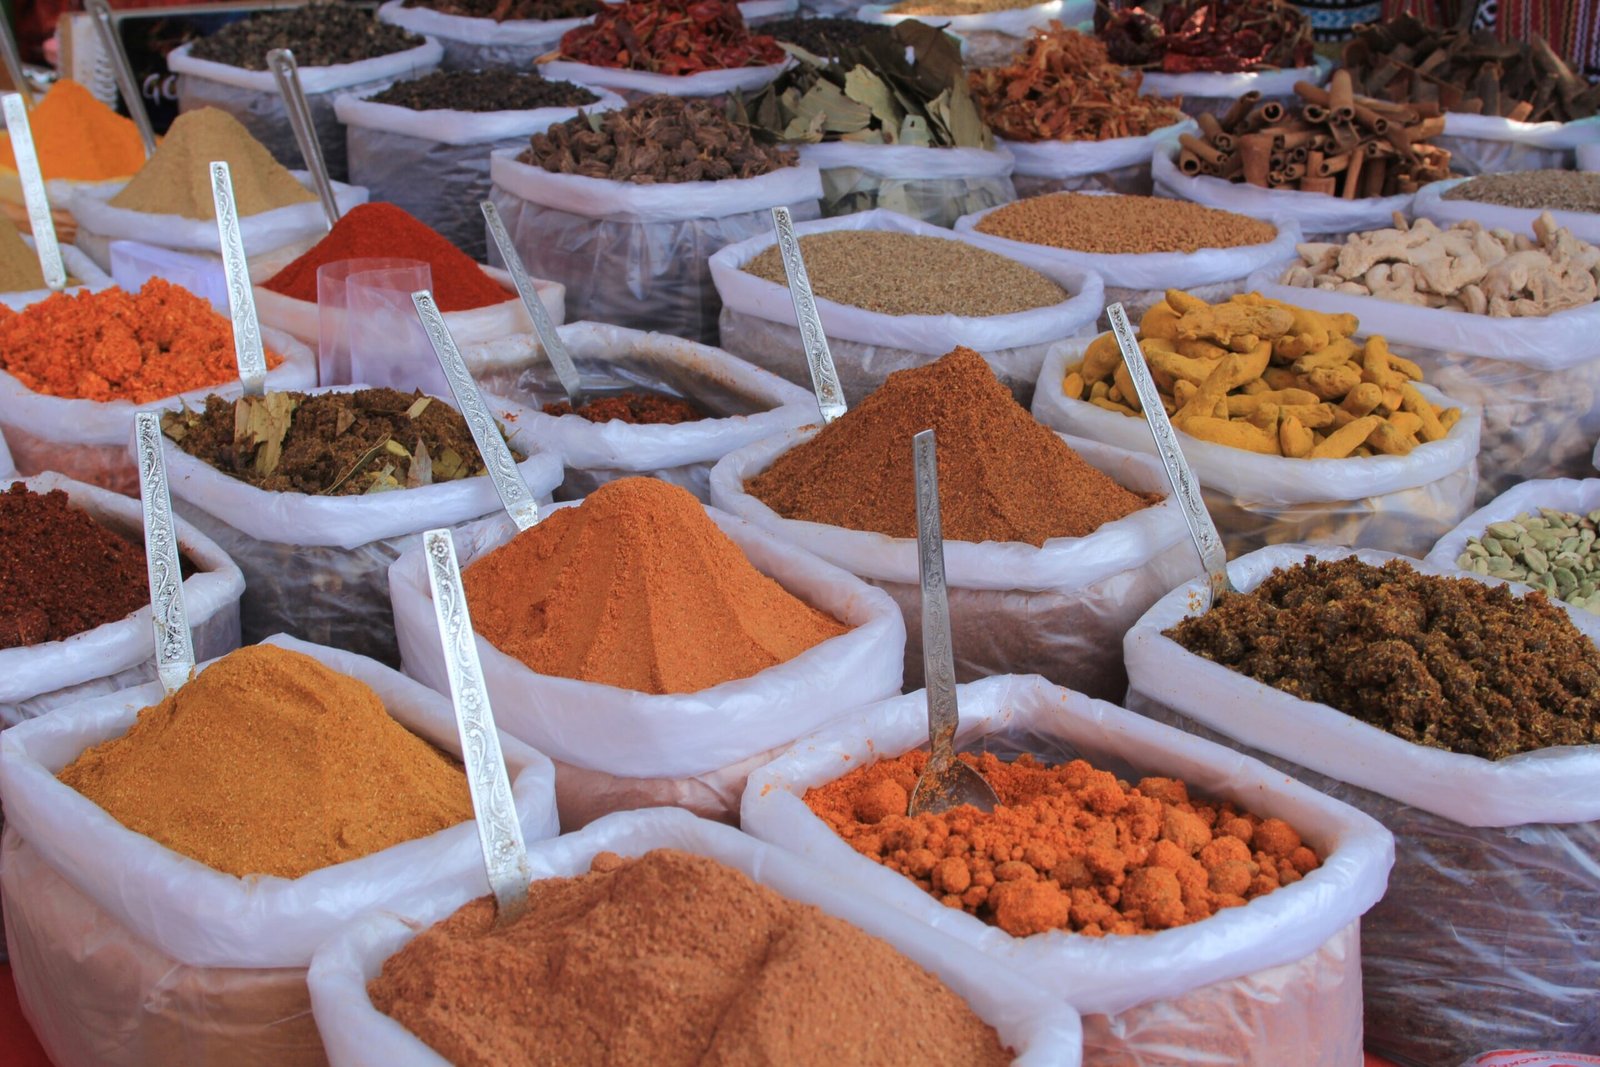 Light measurement enables estimation of the chemical attributes of spice extracts